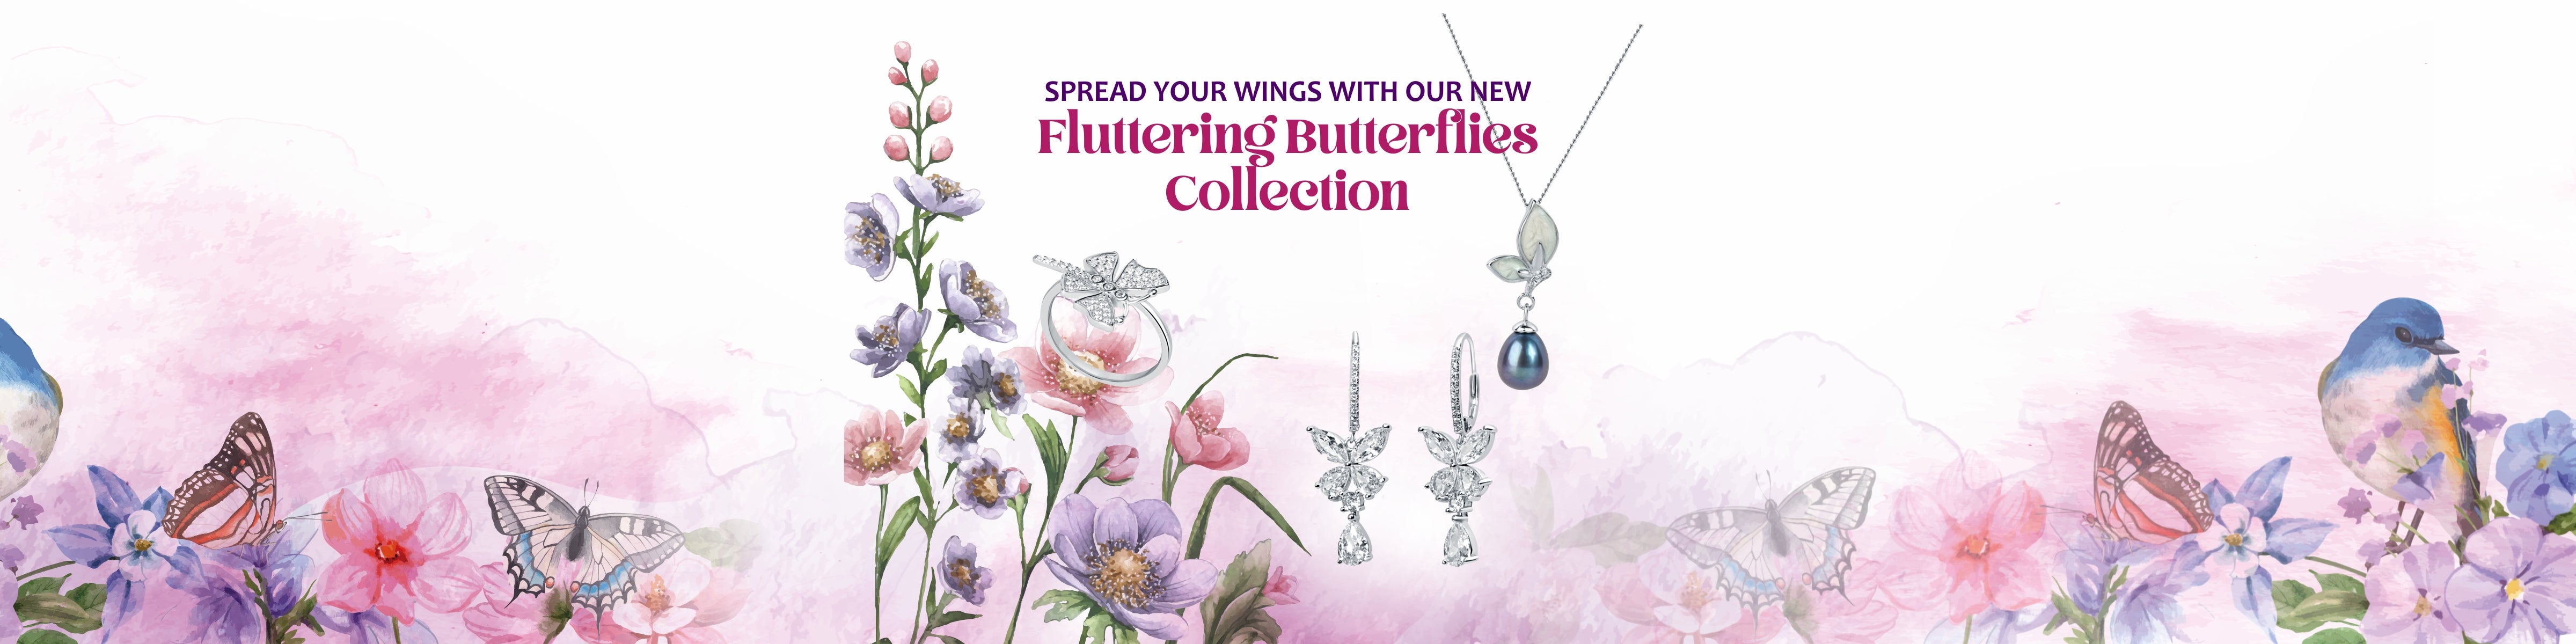 Spread Your Wings with Our New Fluttering Butterflies Collection